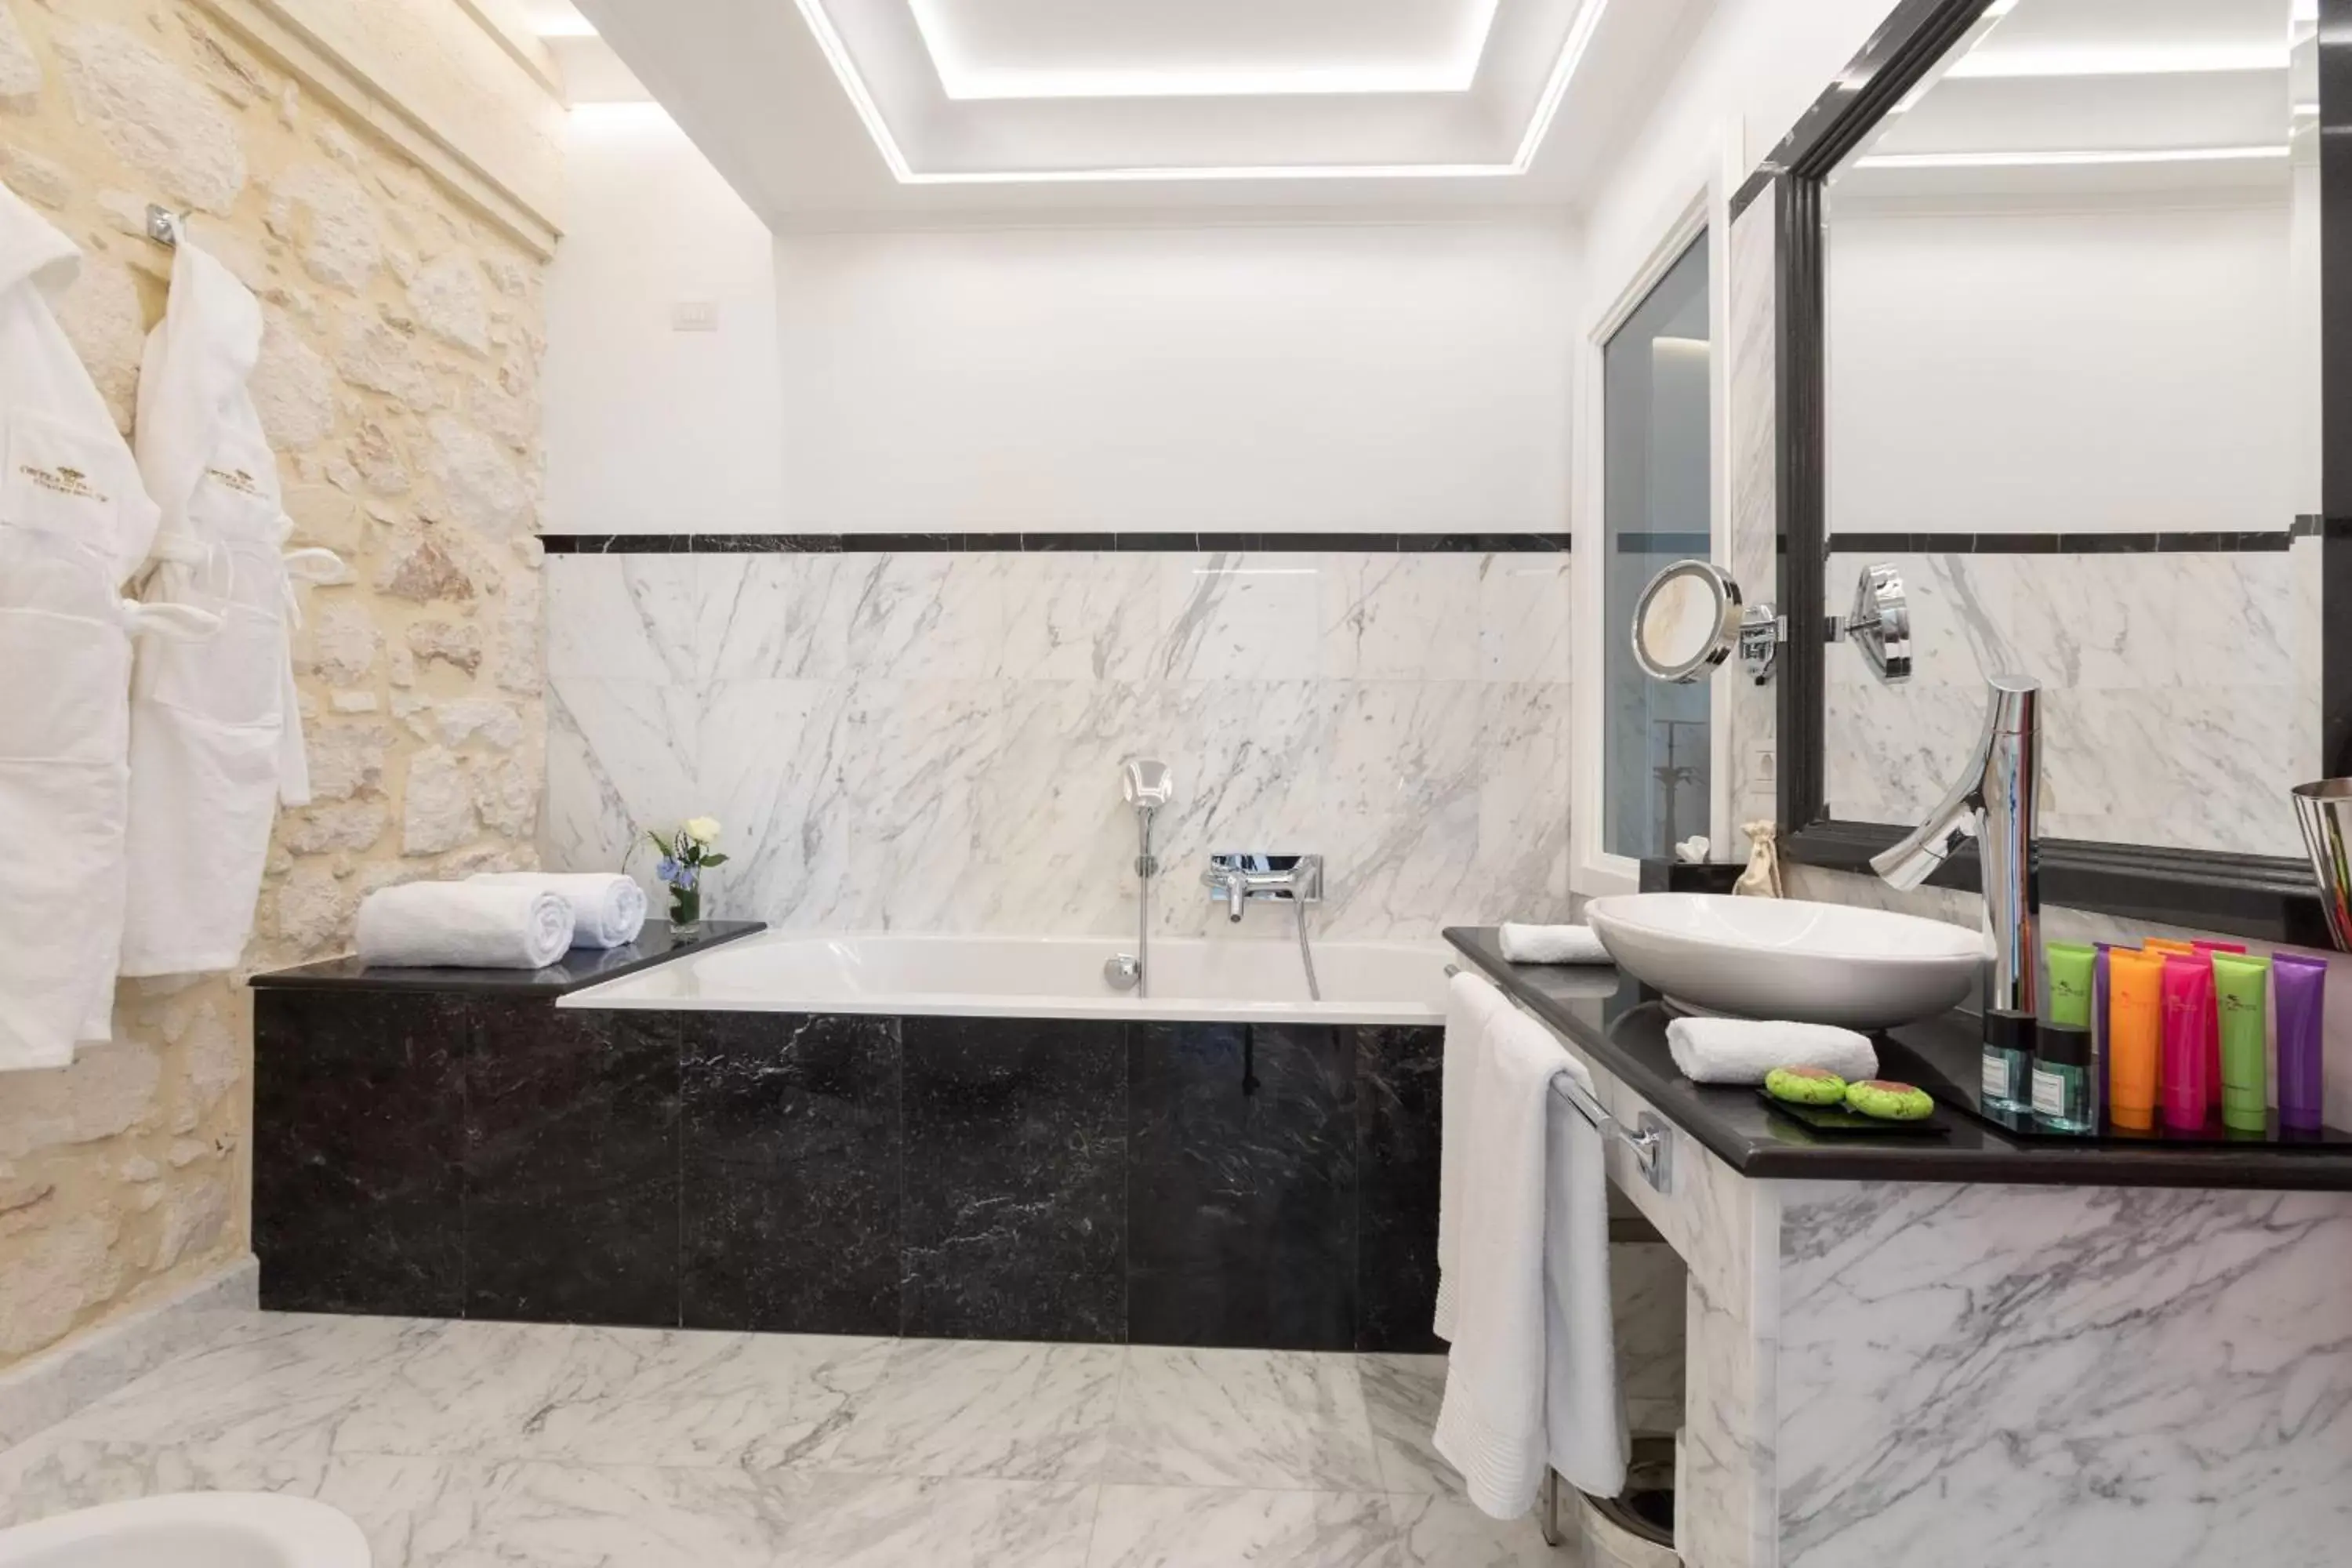 Bathroom in Ortea Palace Hotel, Sicily, Autograph Collection